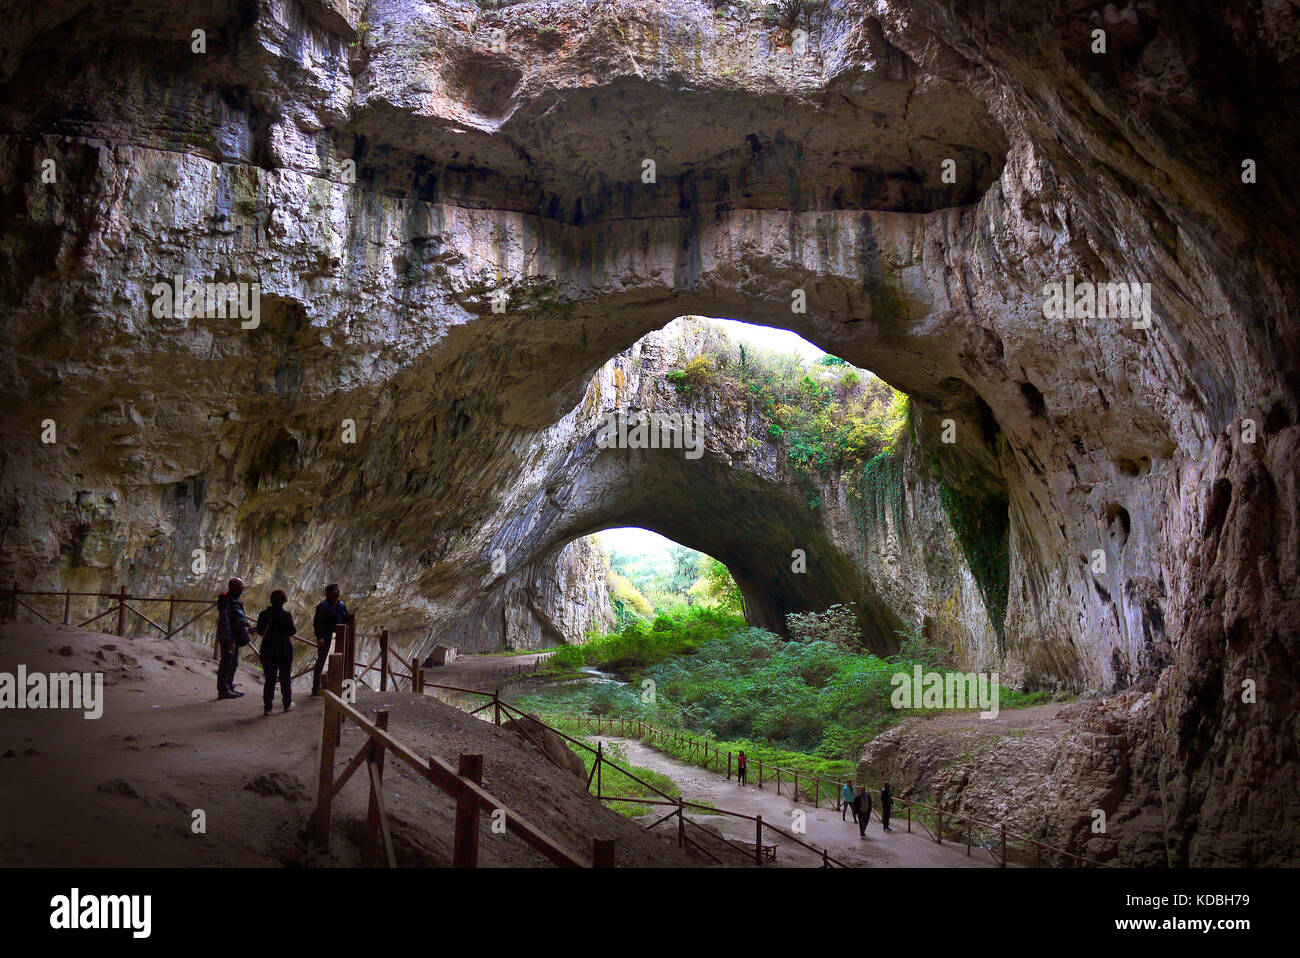 Visitors dwarfed by the size of the Devetashka Cave in Bulgaria. Stock Photo